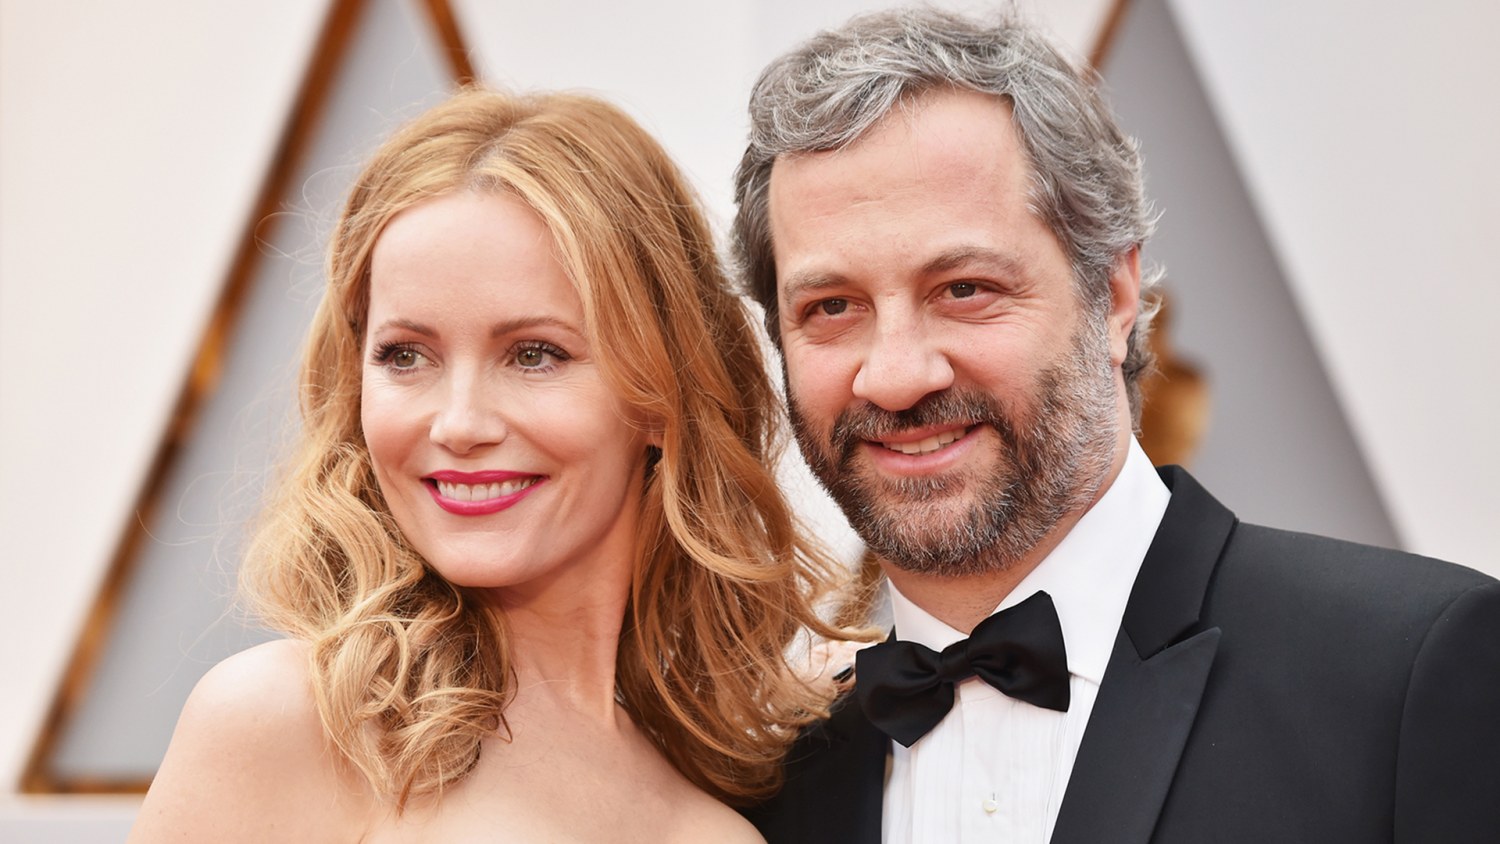 Seth Auditions to Be Leslie Mann and Judd Apatow's New Couple Friends 